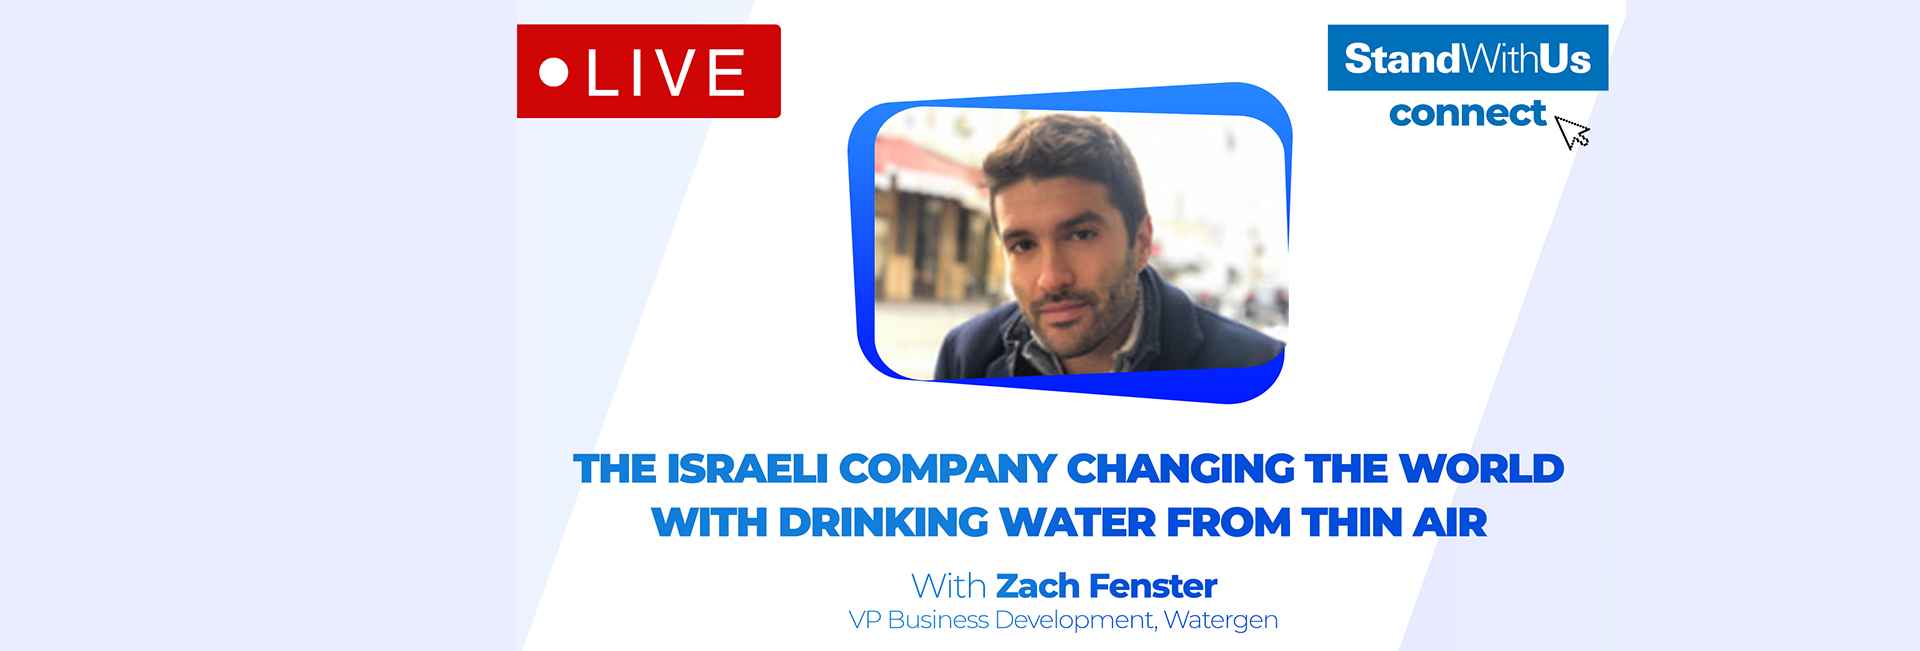 The Israeli Company Creating Drinking Water from Thin Air